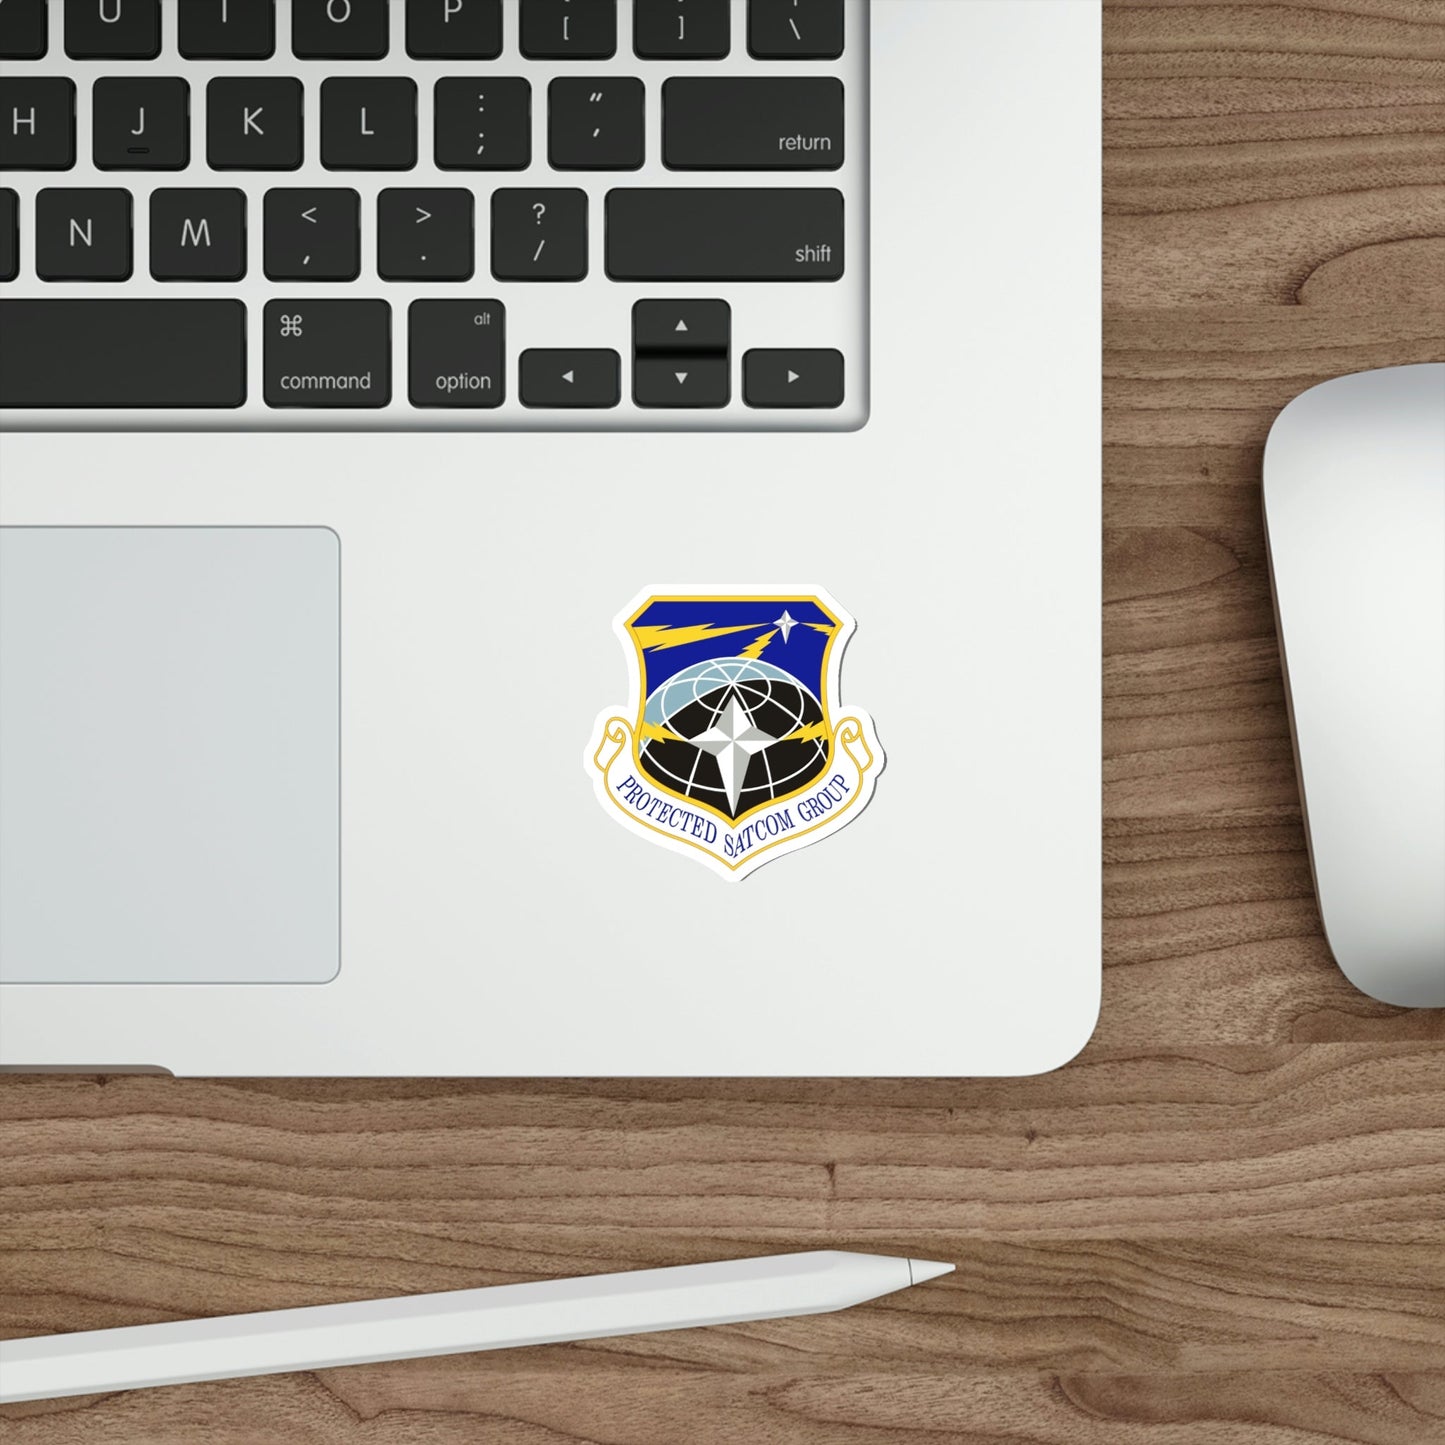 Protected SATCOM Group (U.S. Air Force) STICKER Vinyl Die-Cut Decal-The Sticker Space